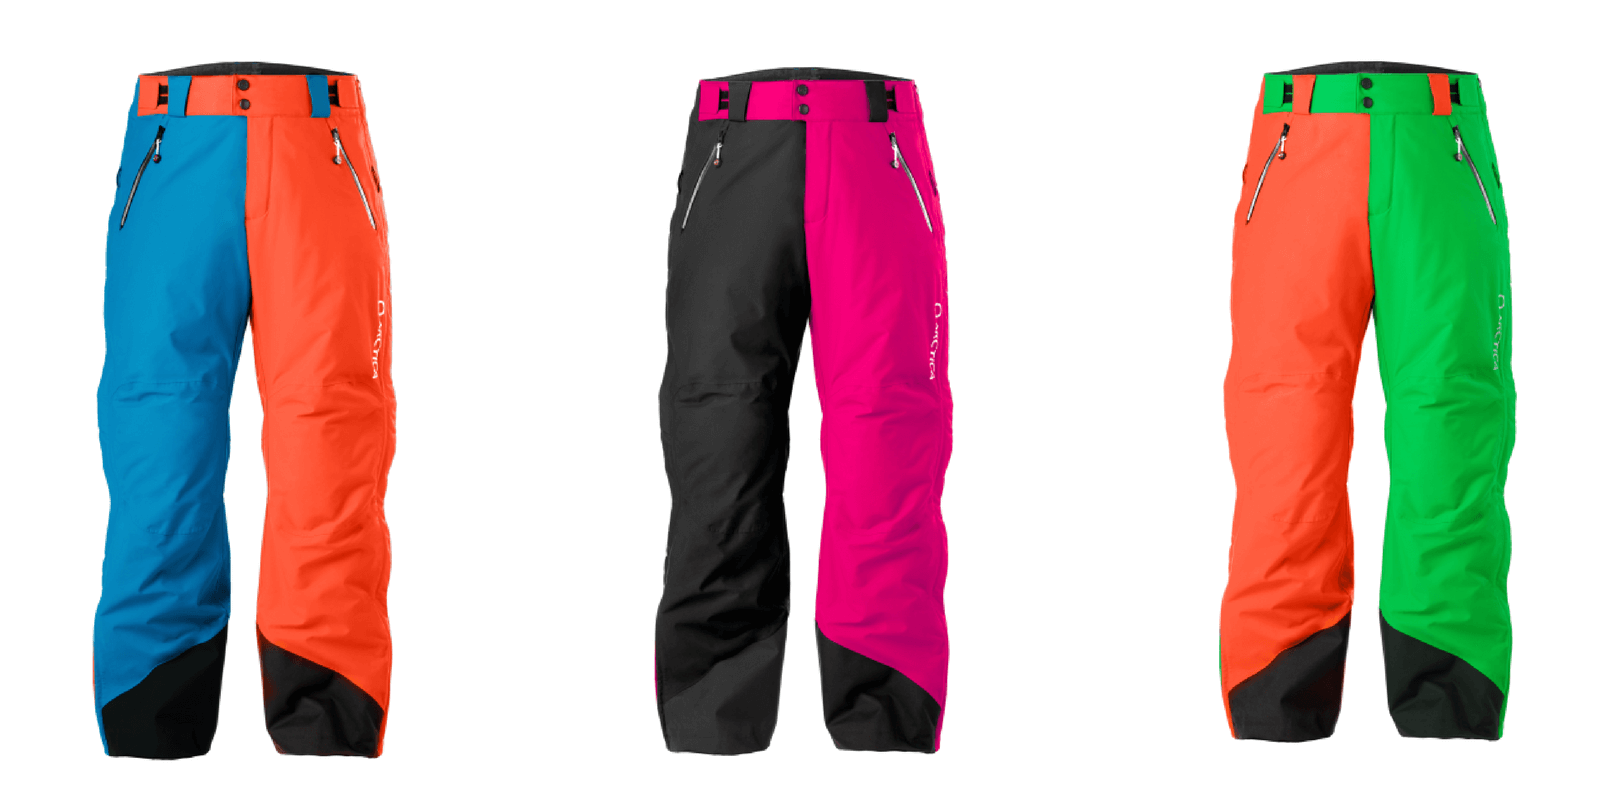 New Arctica Side Zip 2.0 pants for 2017-18 in 50/50 colors - black/pink, ocean/tangerine and tangerine/lime.